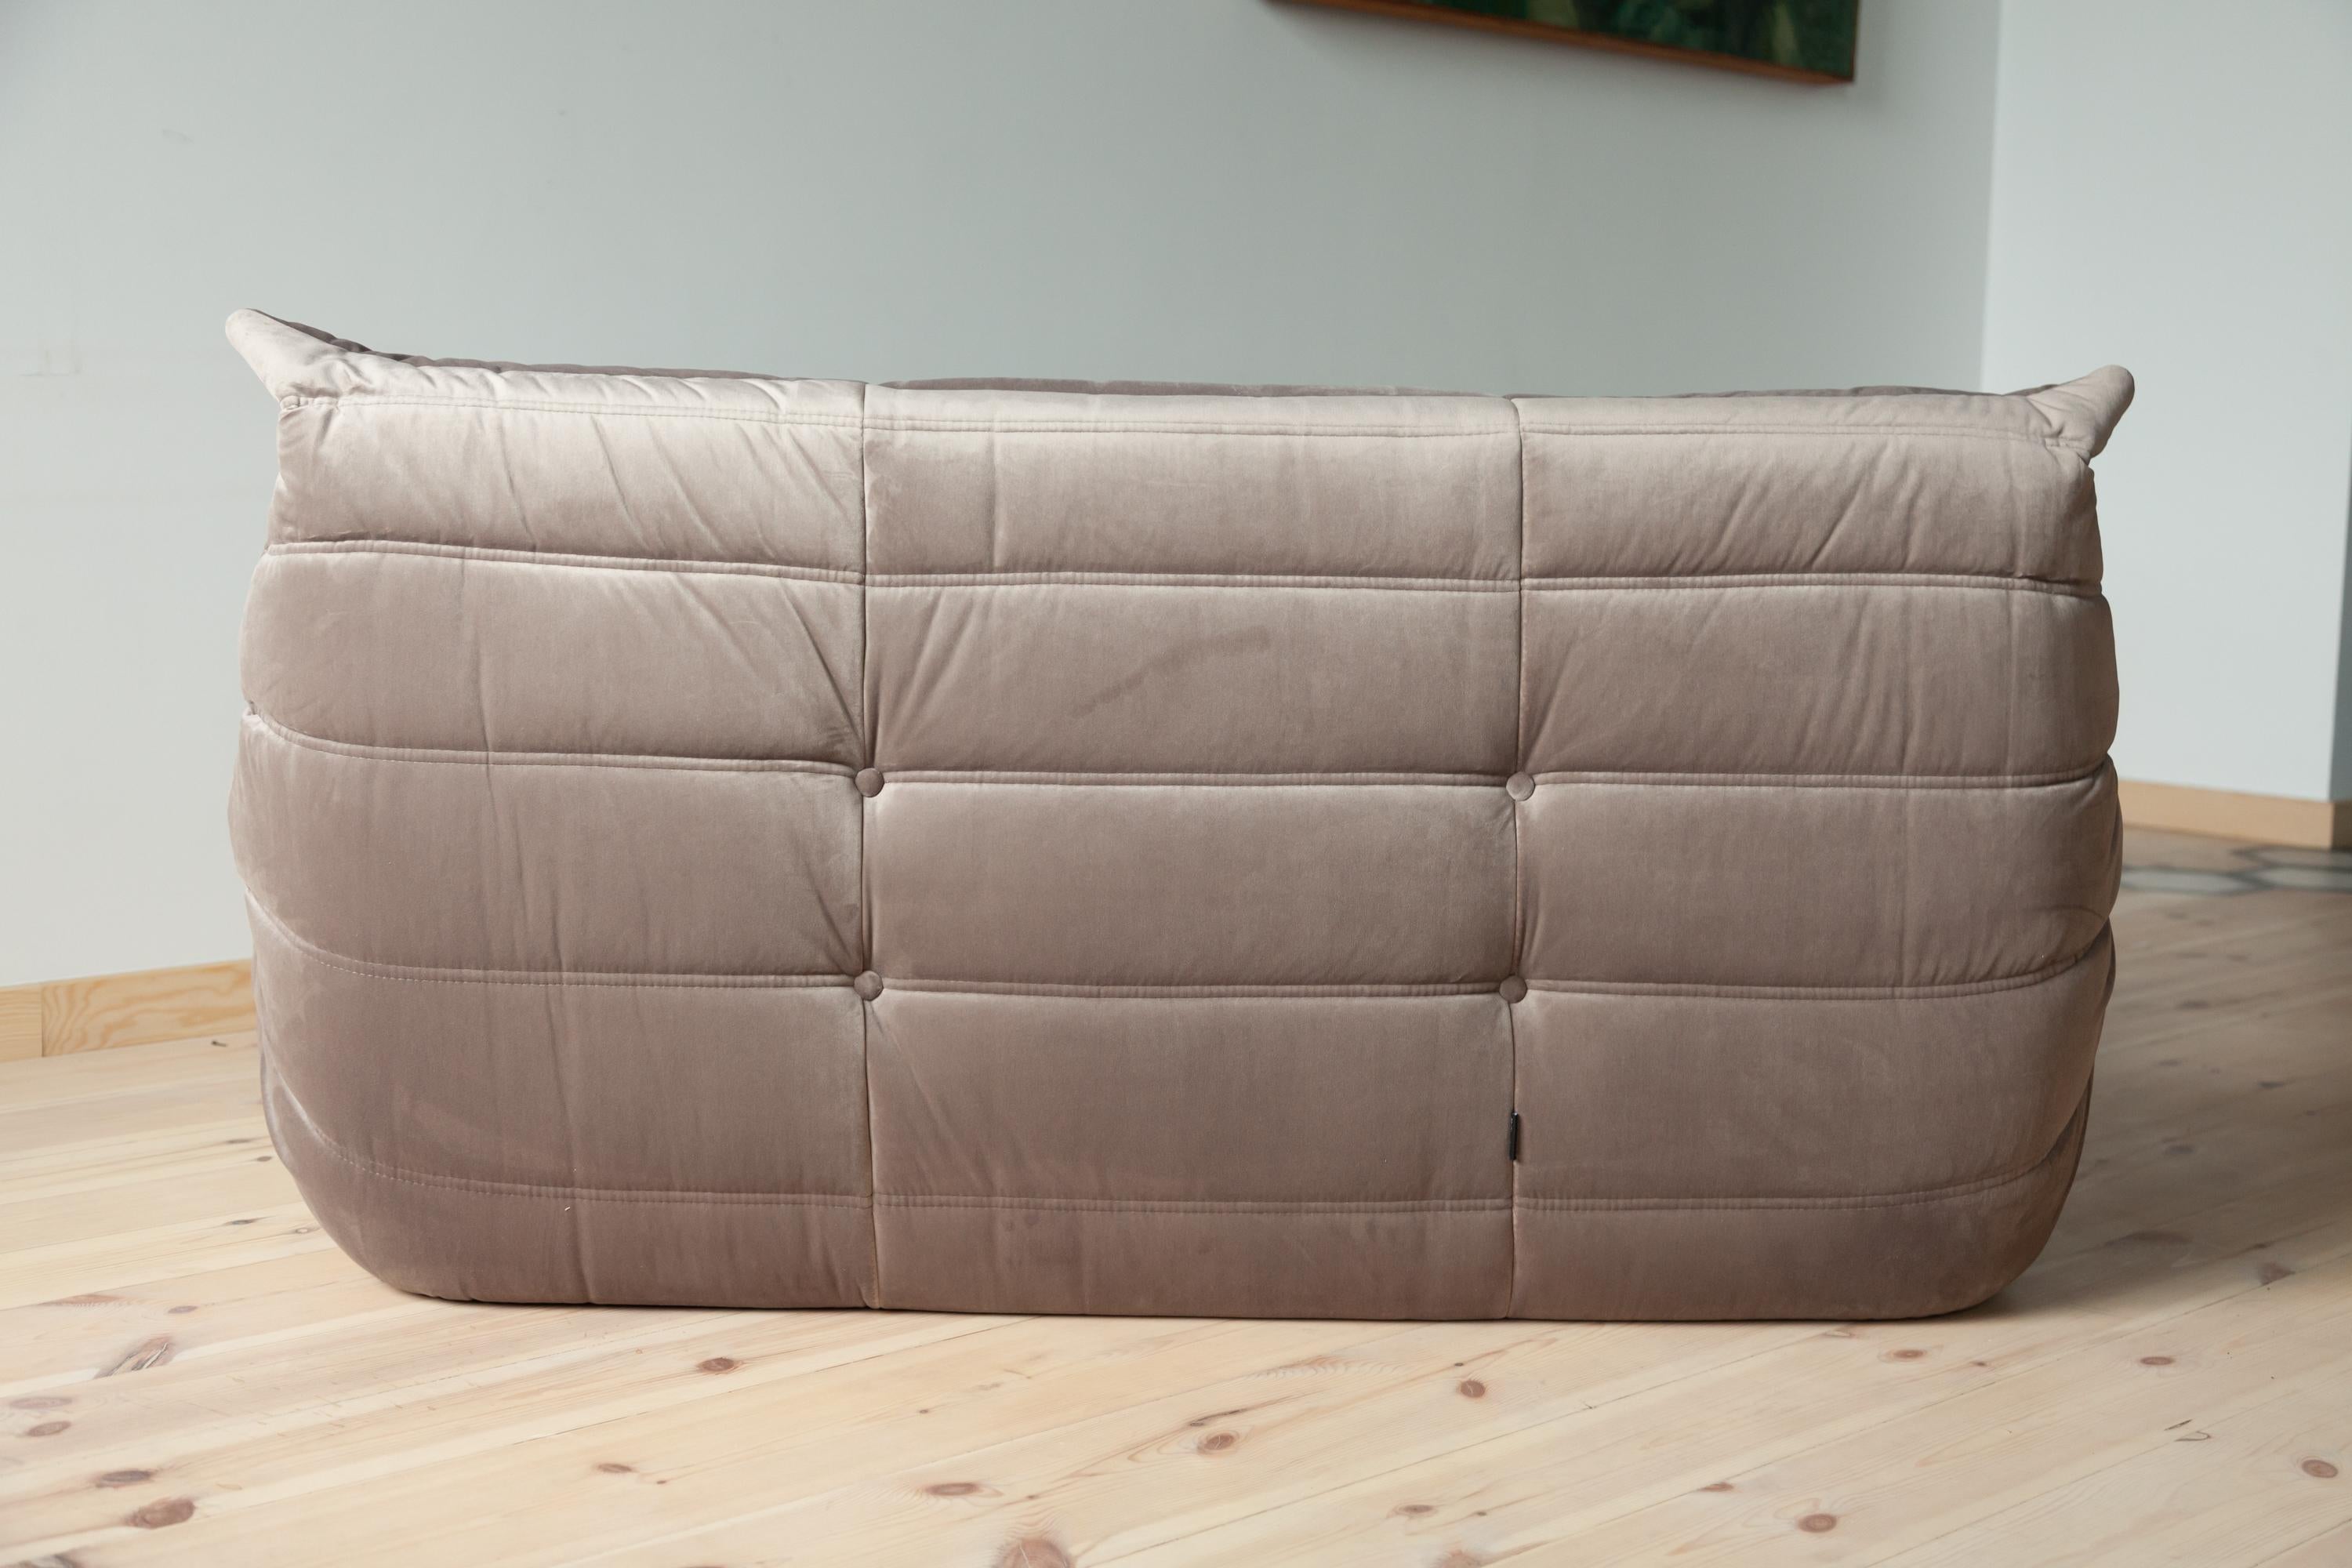 Togo 2-Seat Sofa in Pinkish- Grey Velvet by Michel Ducaroy for Ligne Roset In Excellent Condition For Sale In Berlin, DE